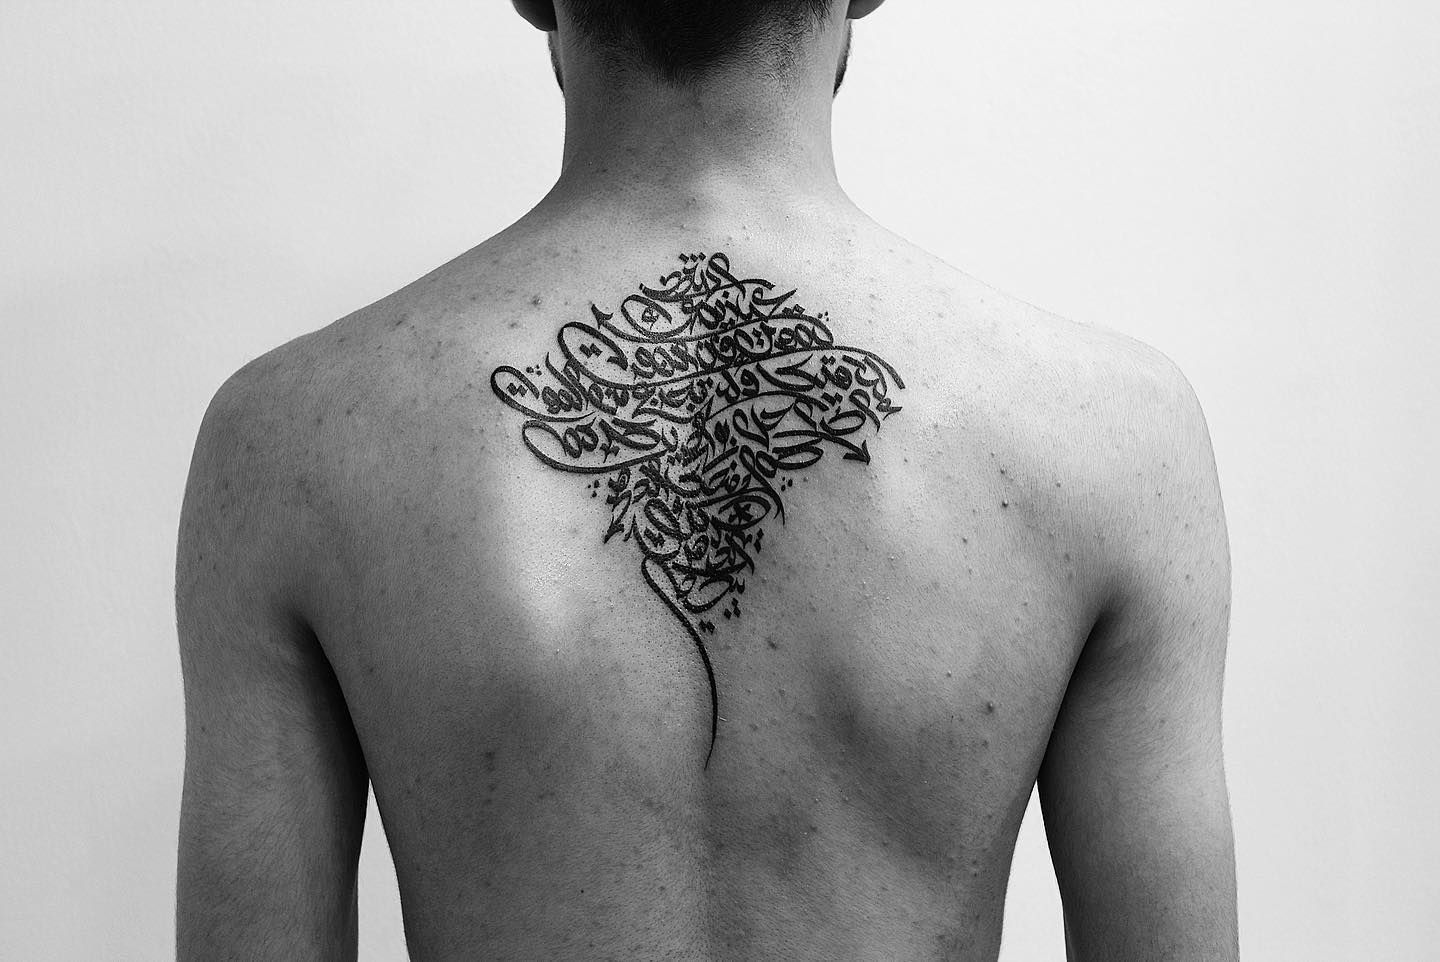 A giant back tattoo in Arabic is sure to make you stand out from the crowd. It looks super-complicated and you need a talented tattoo artist for it.